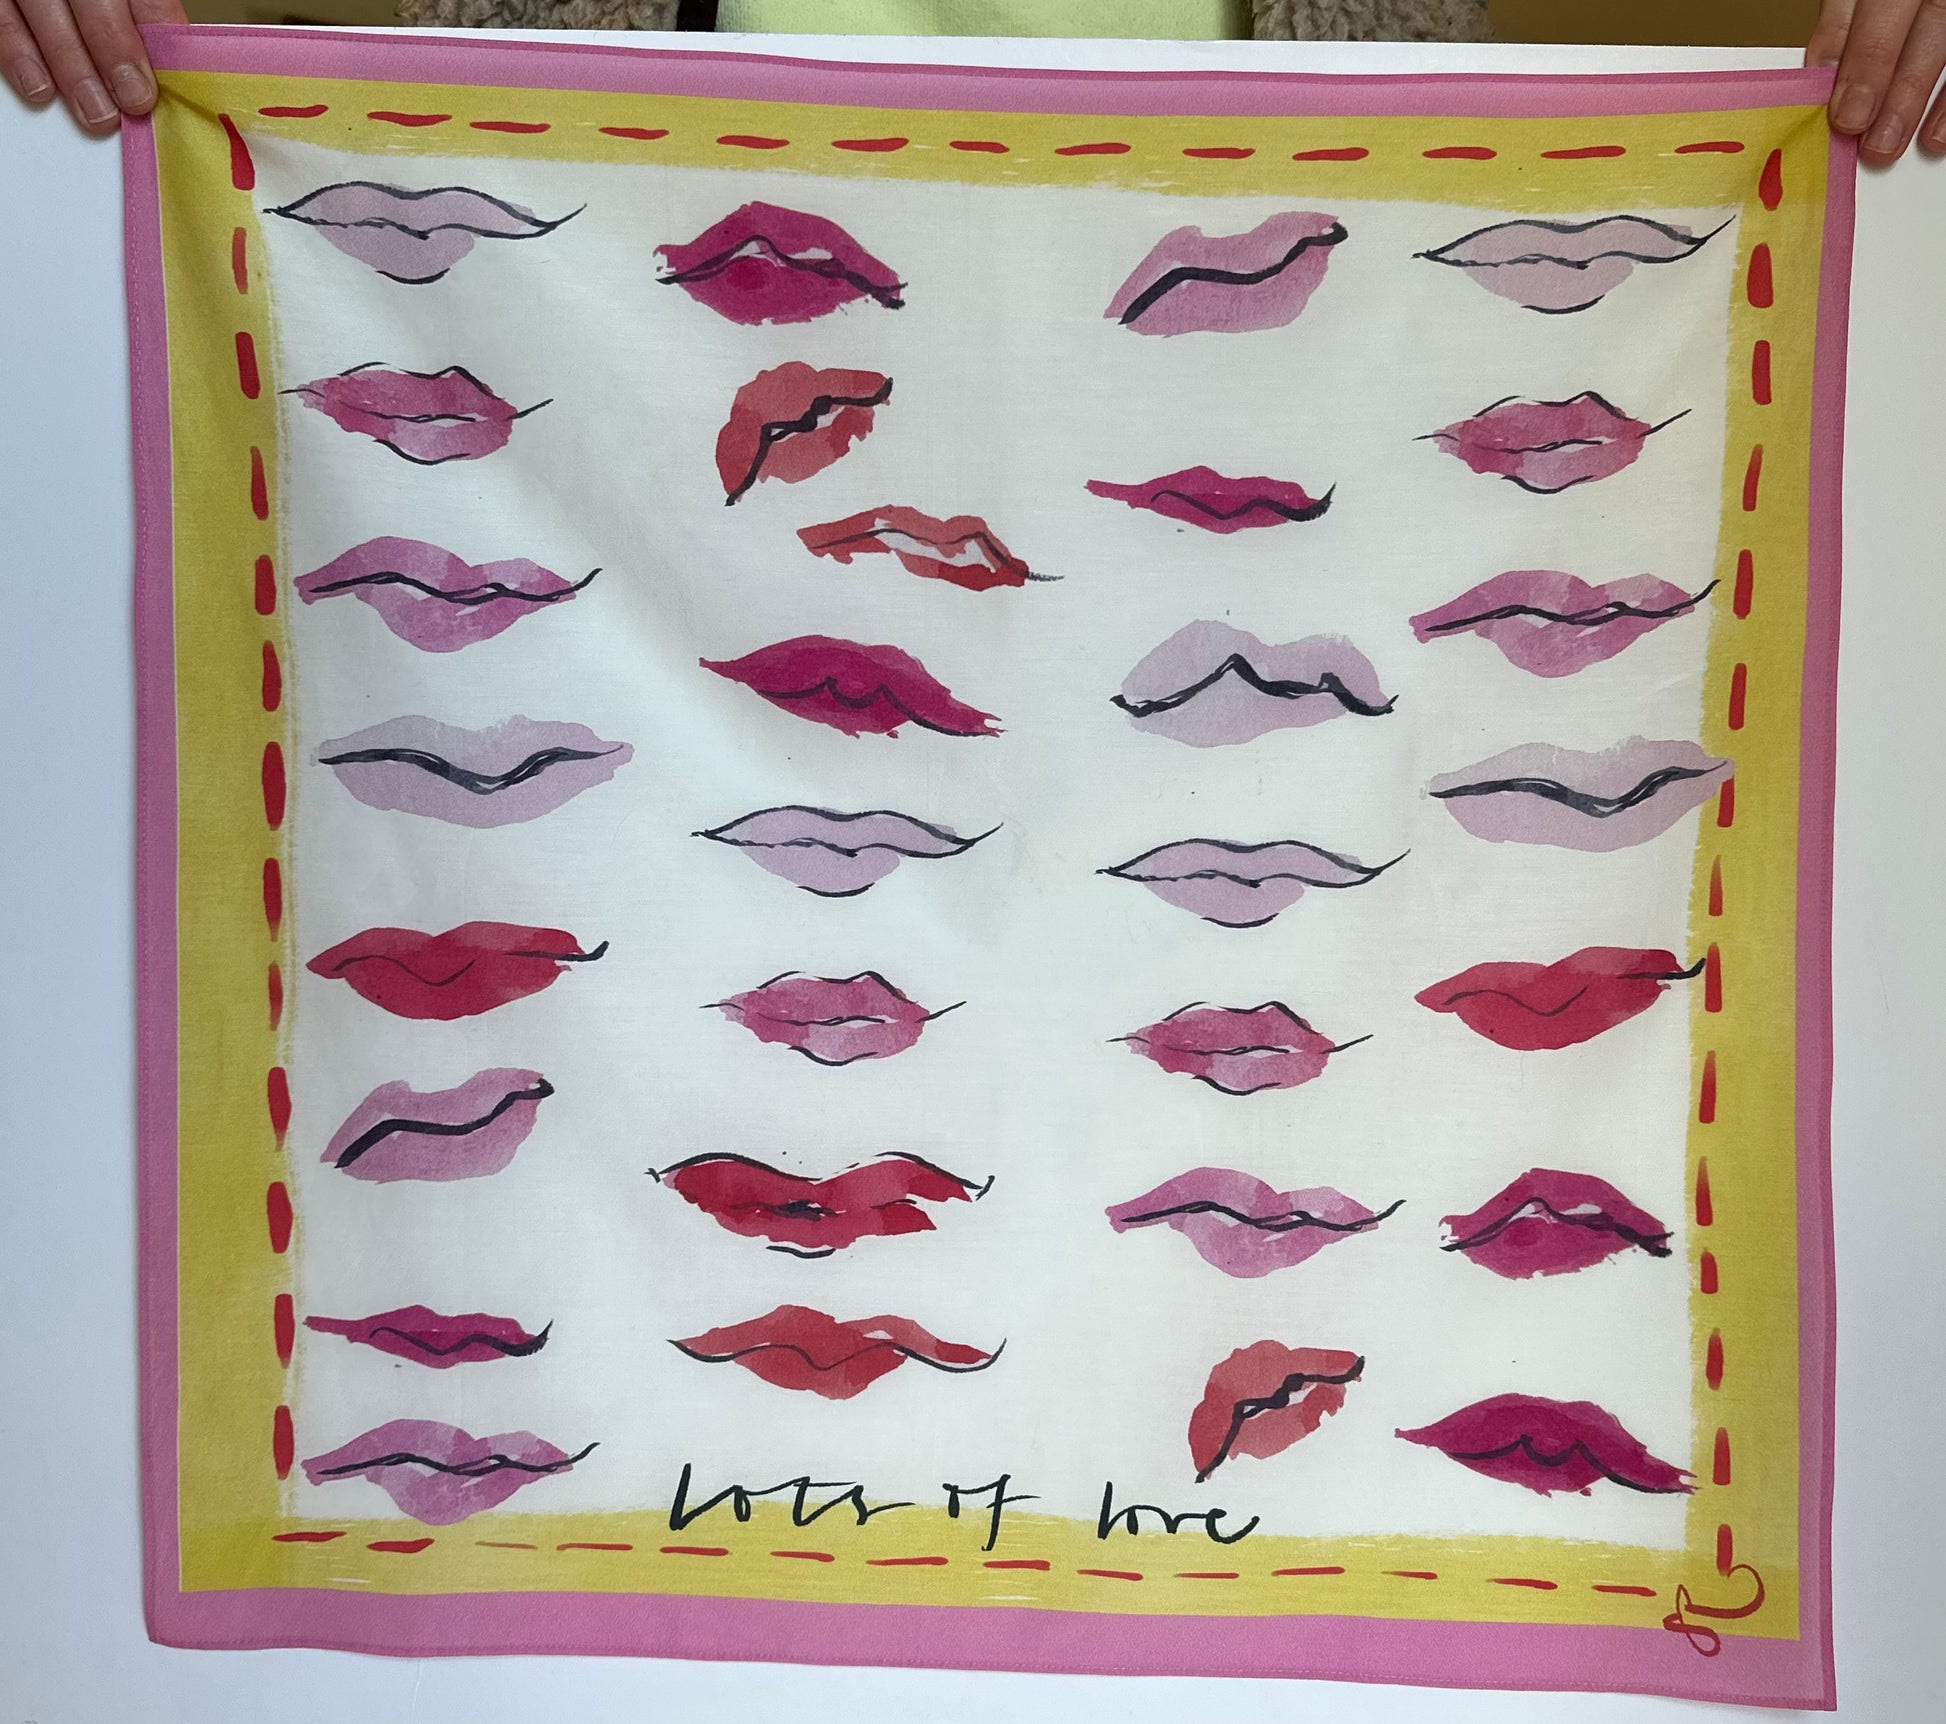 100% silk square scarf with kiss design